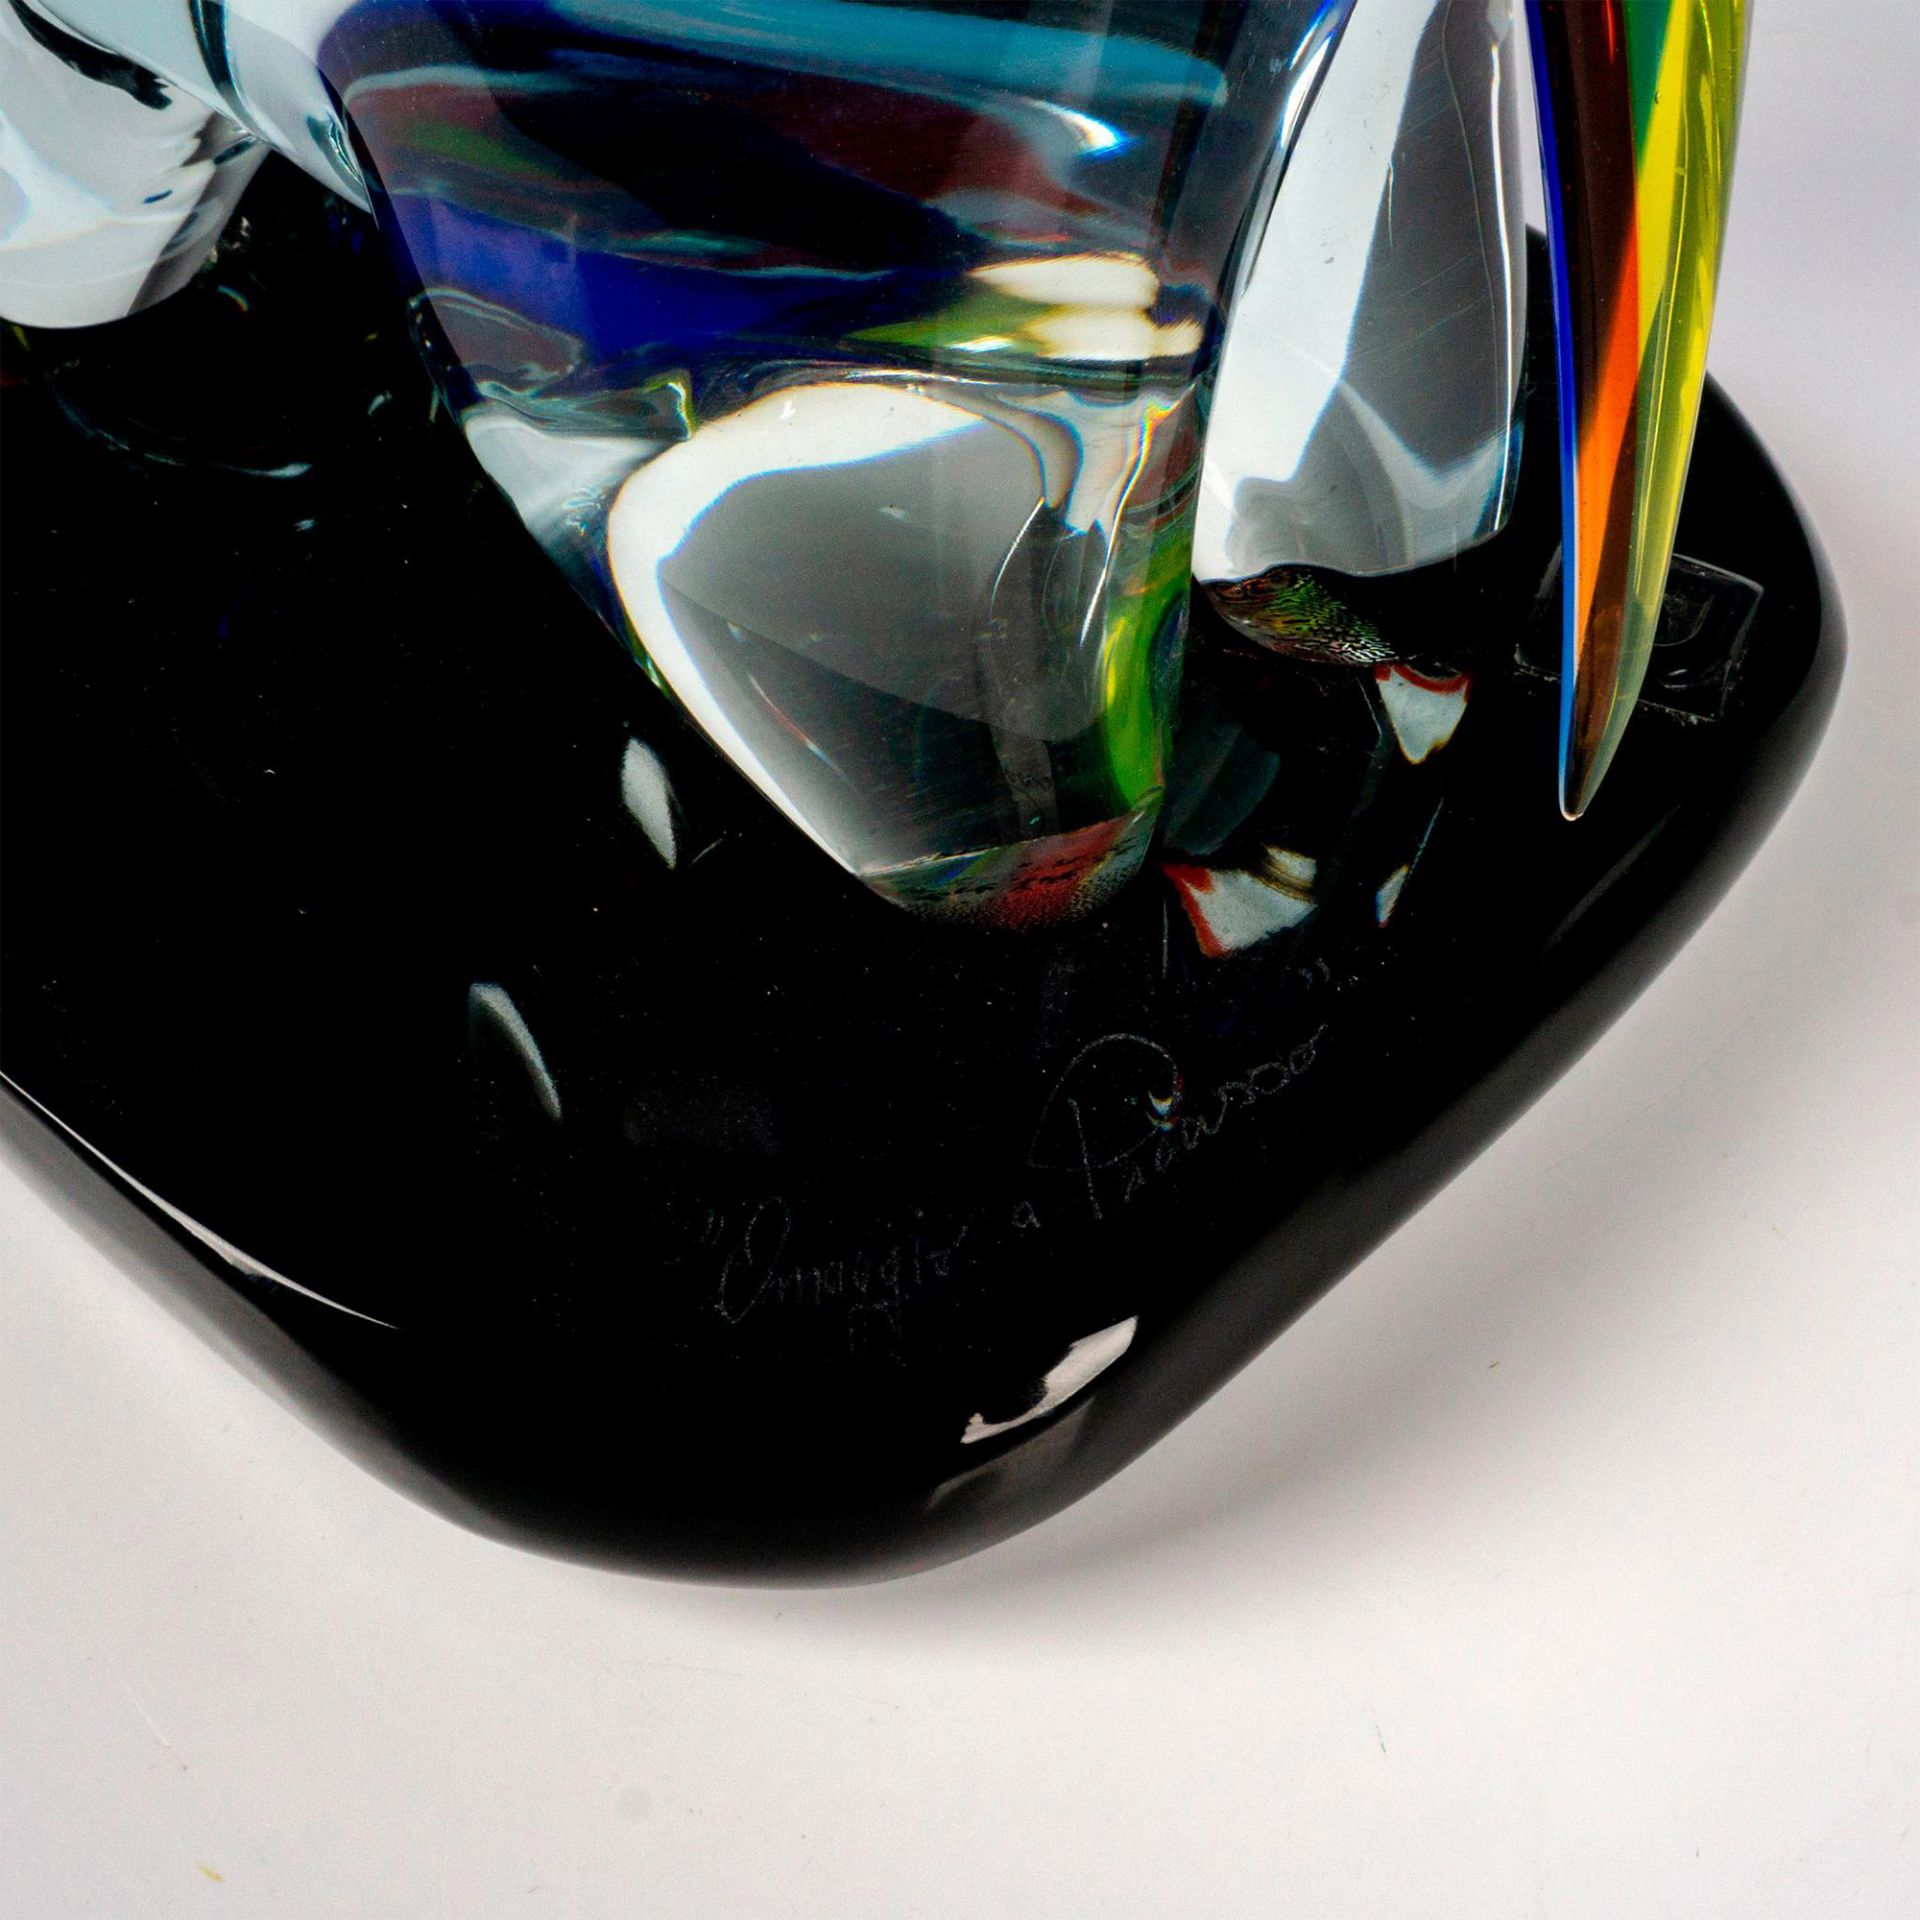 Murano Glass by Walter Furlan Sculpture, Toretto Signed - Image 7 of 8